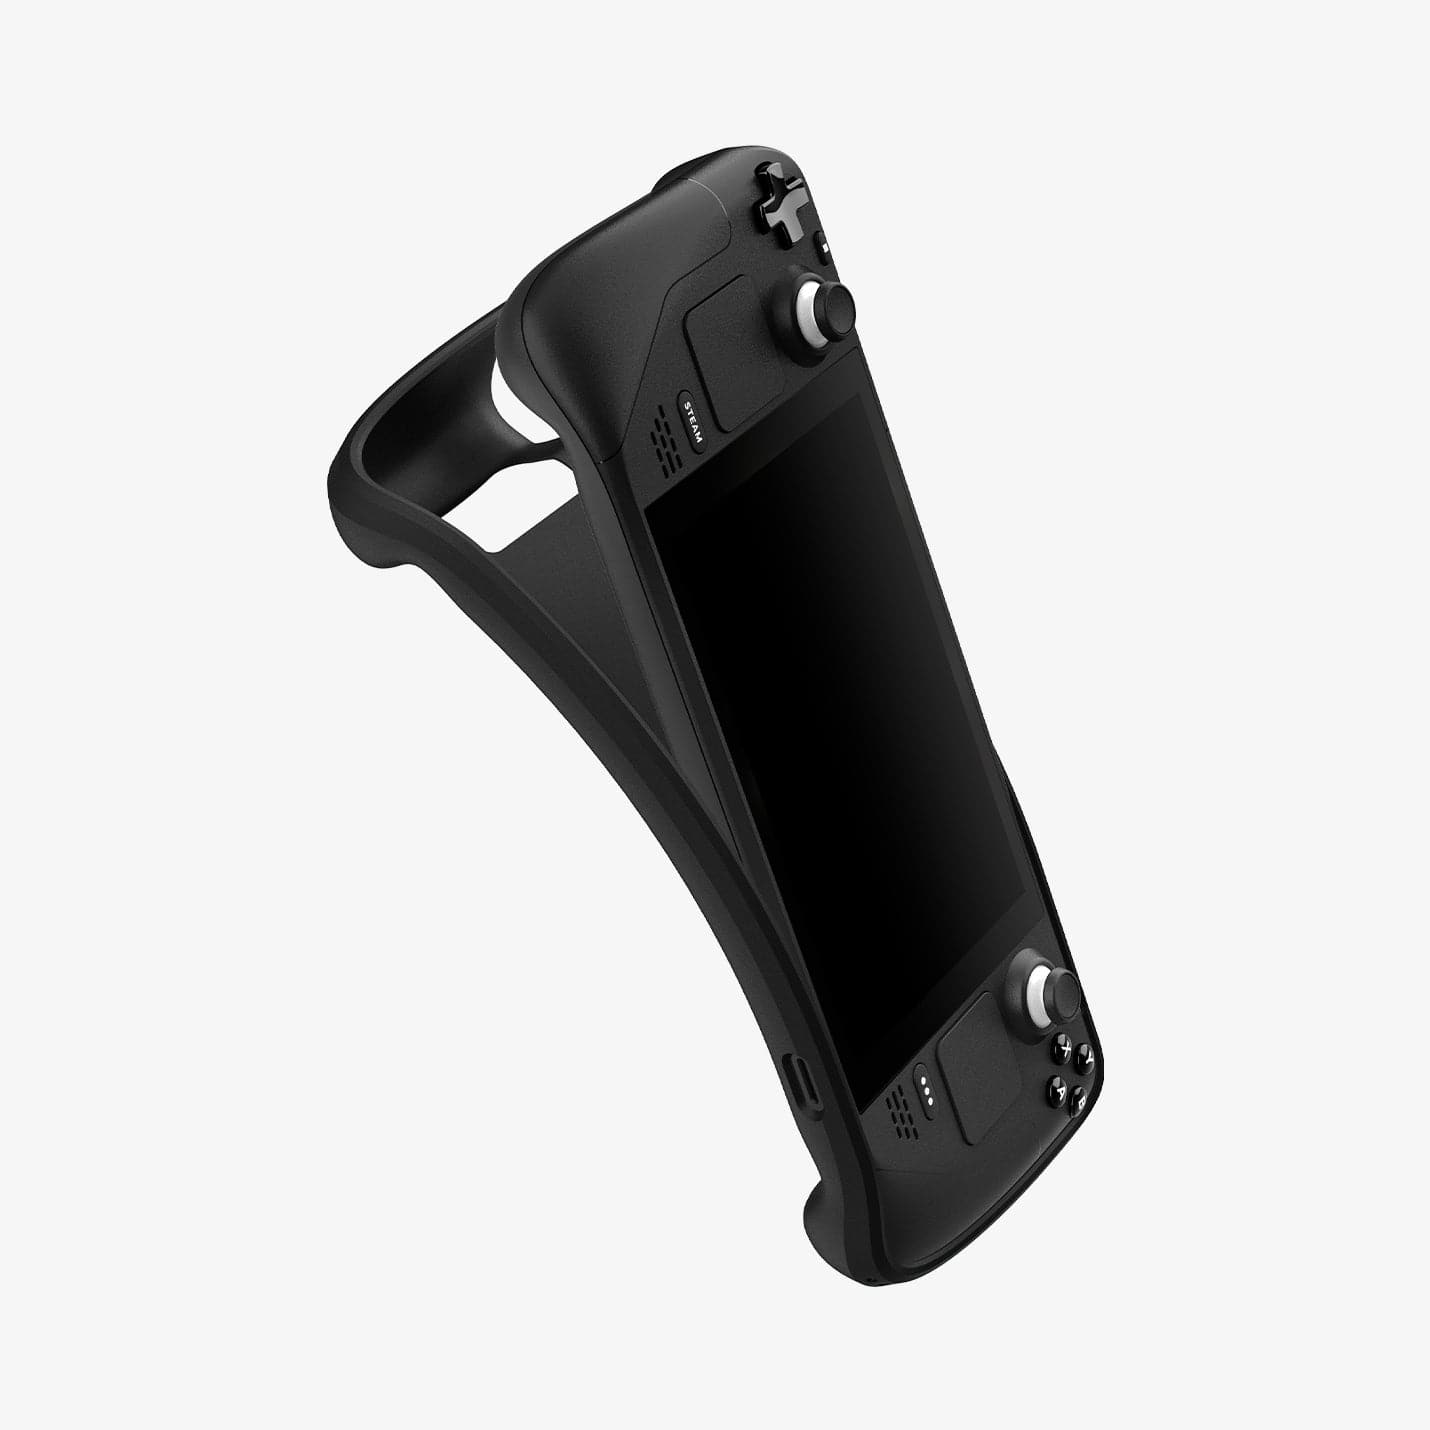 ACS03730 - Steam Deck Case Rugged Armor in matte black showing the case bending away from device to show the flexibility